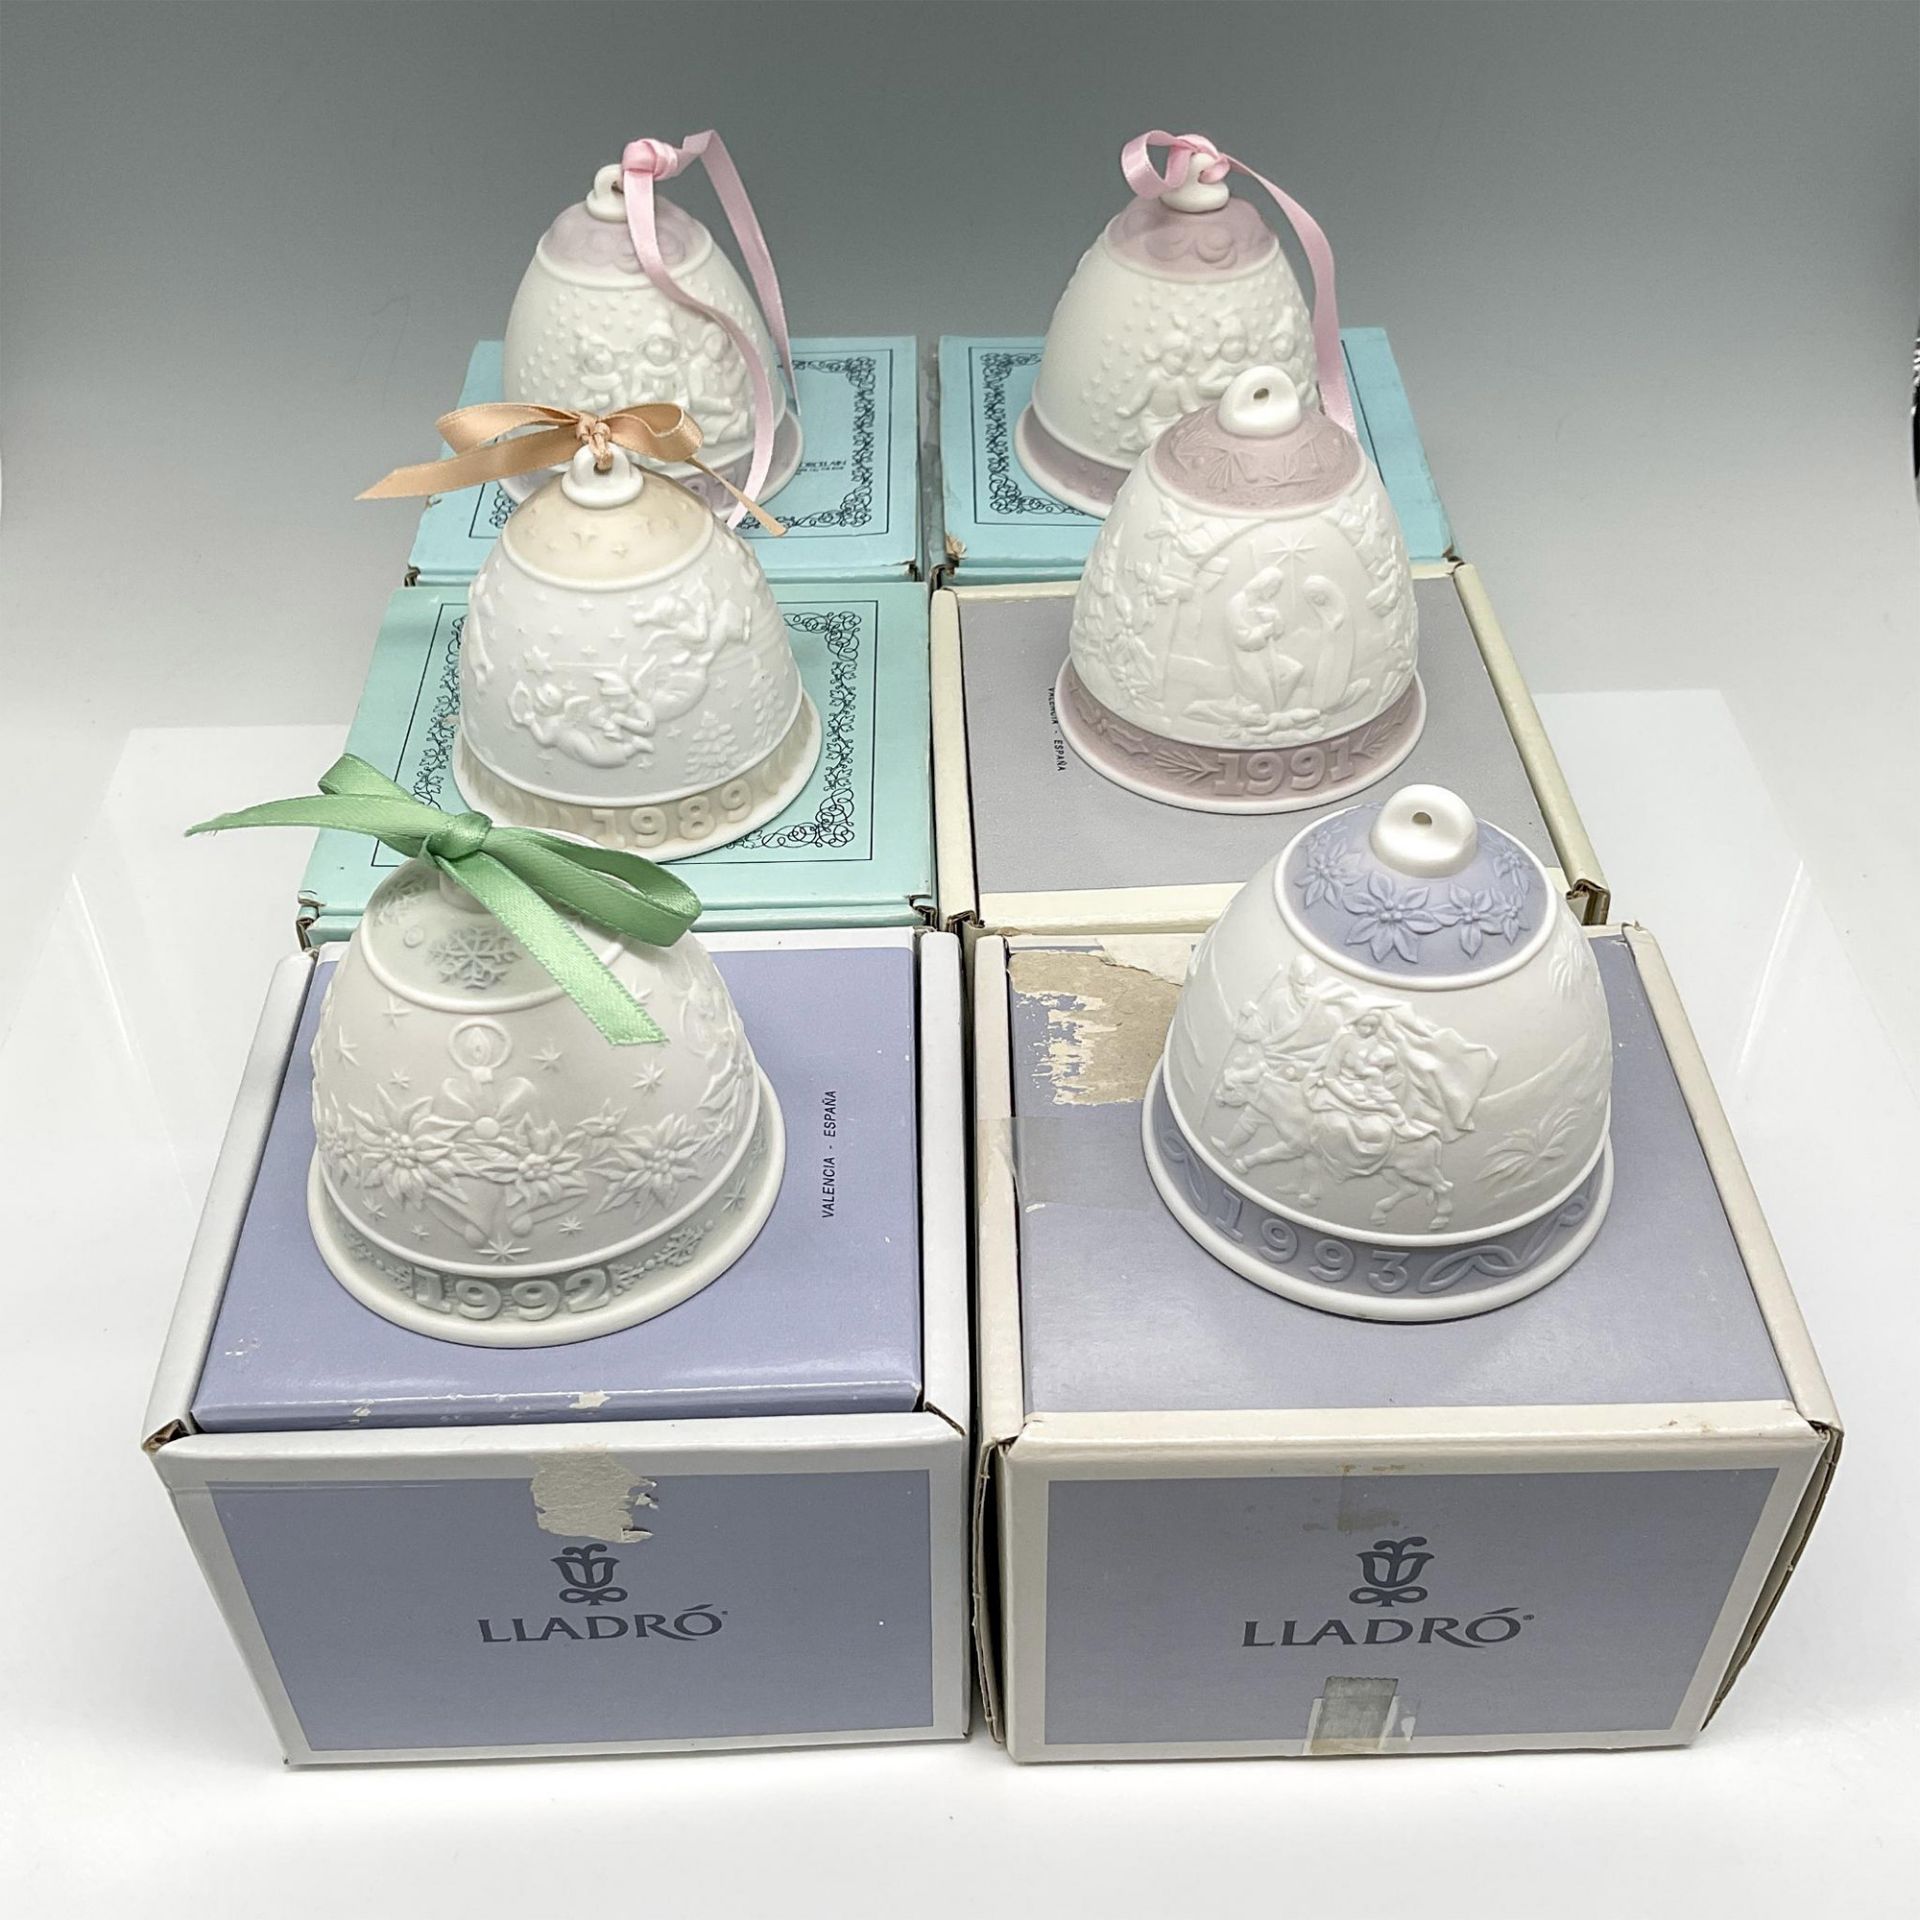 6pc Lladro Porcelain Annual Bell Ornaments - Image 3 of 3